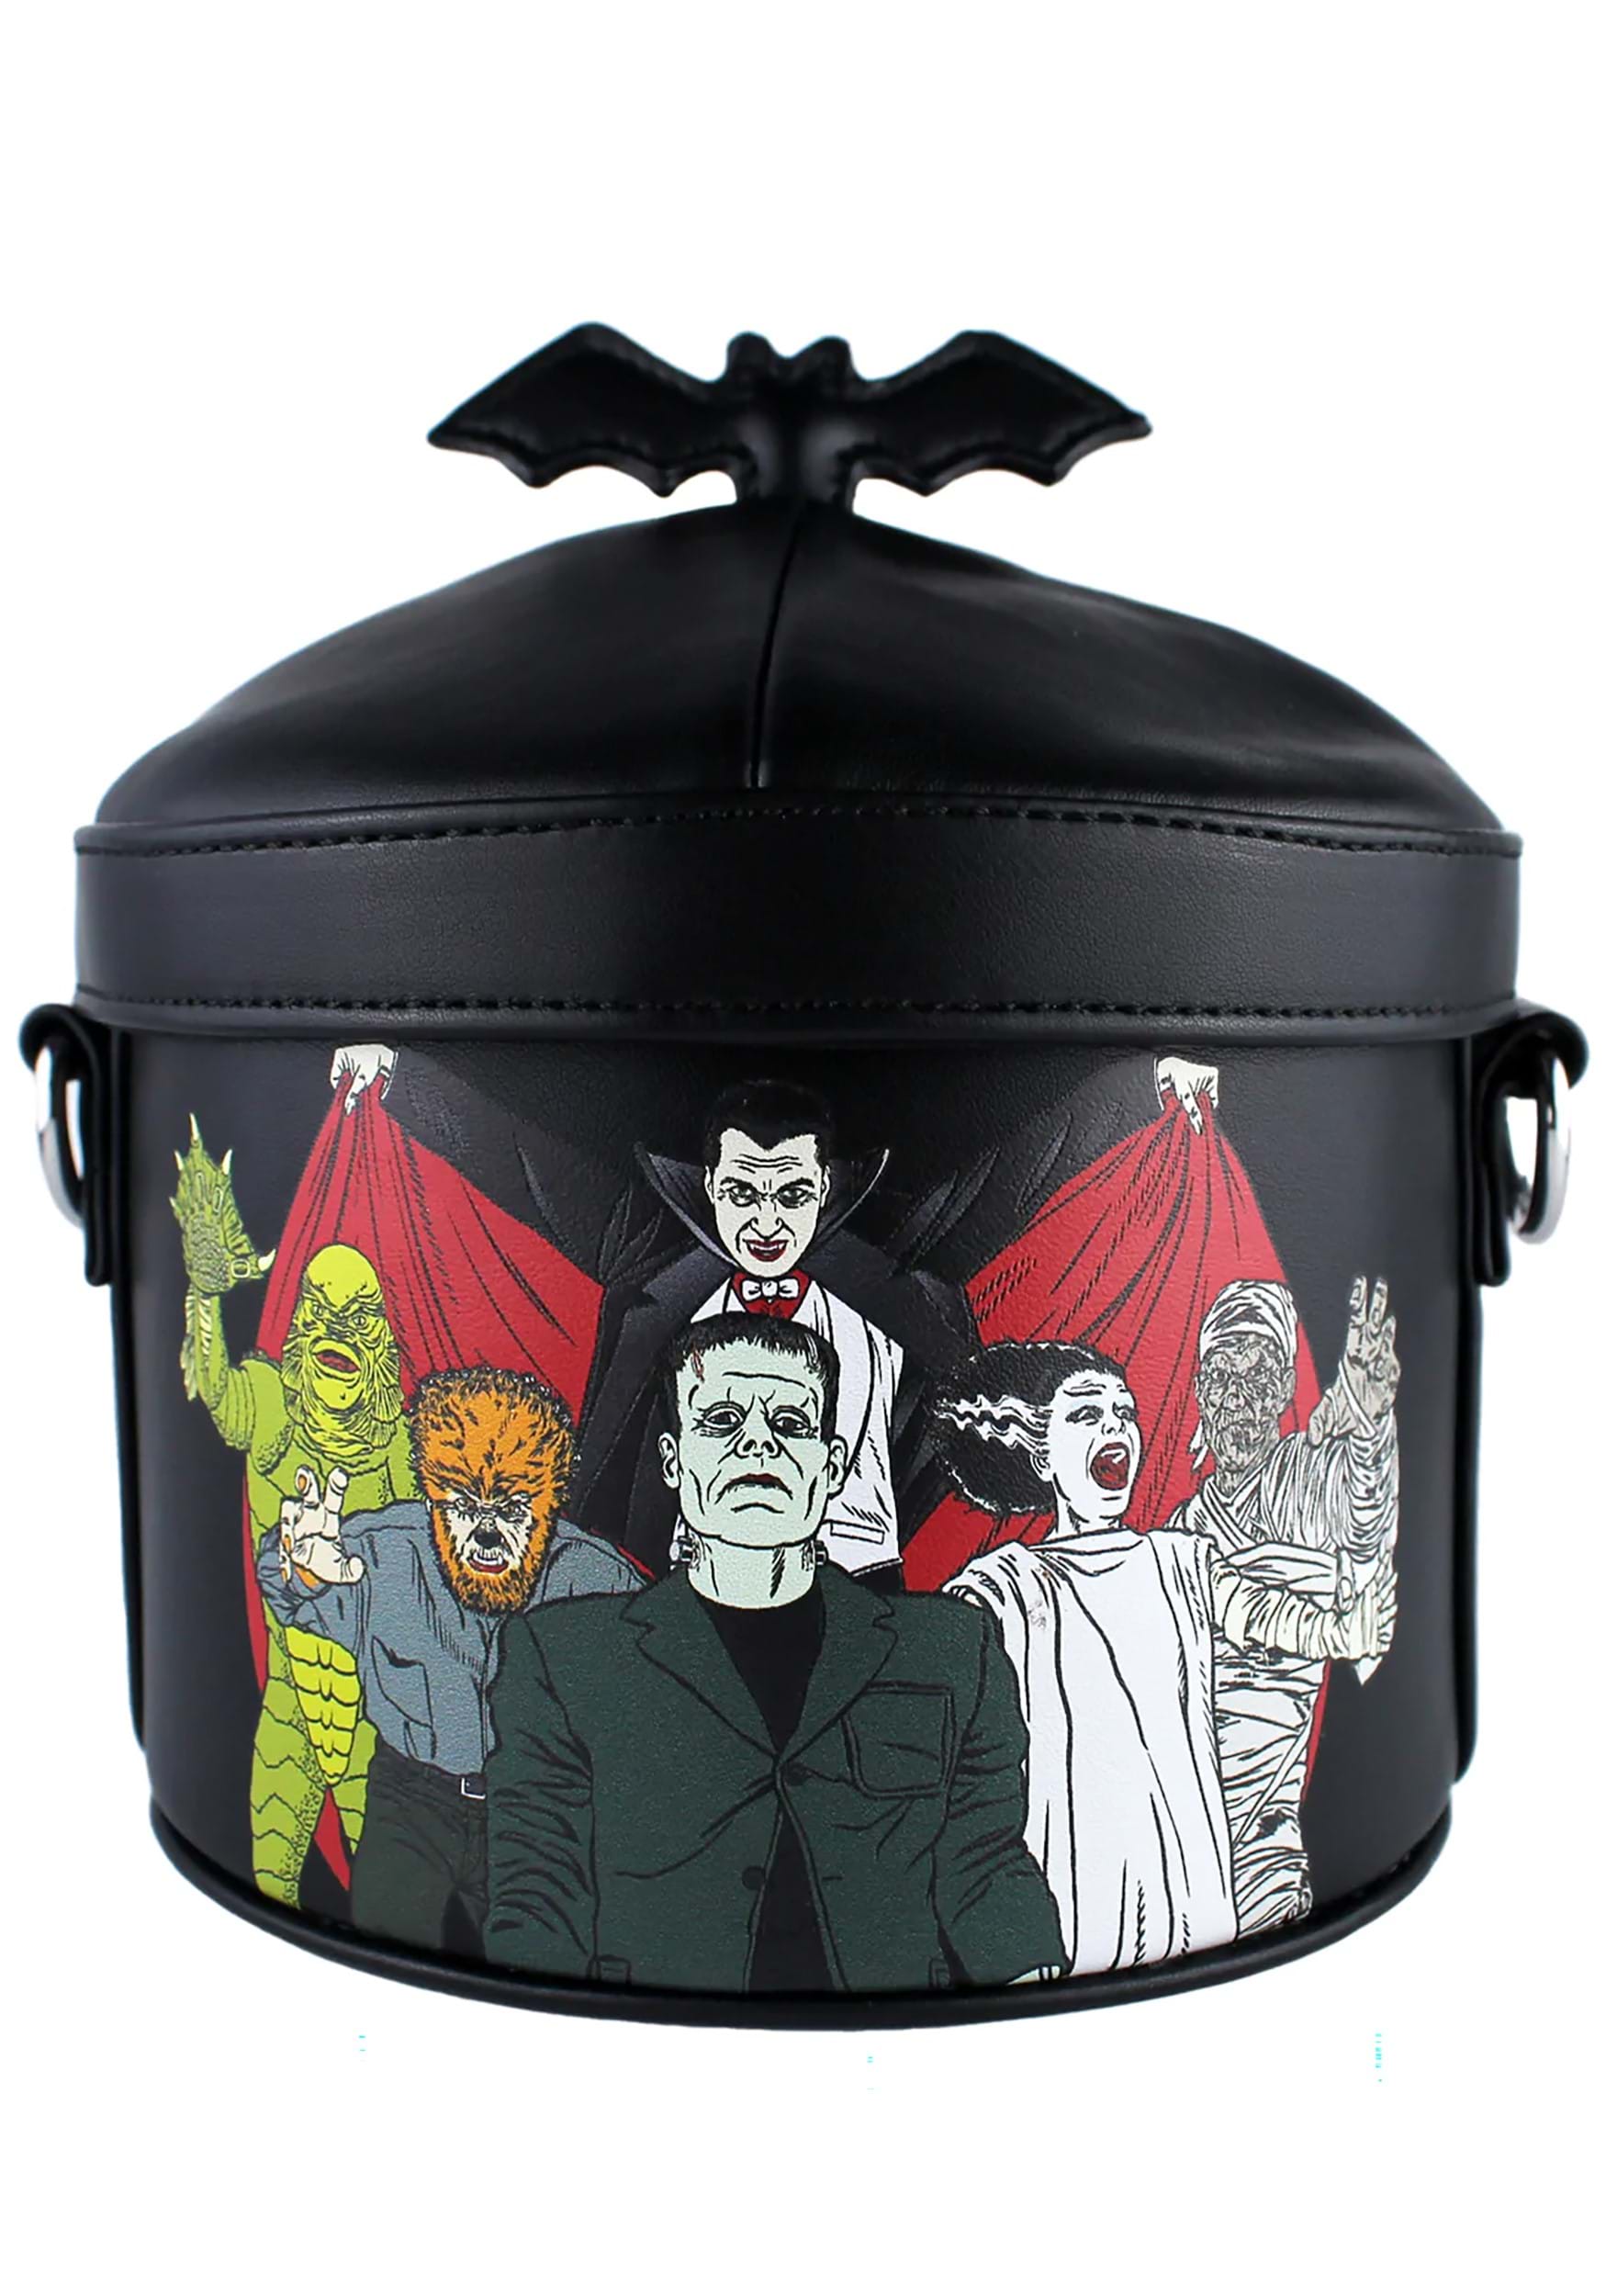 Universal Monsters Trick or Treat Bucket Purse by Cakeworthy